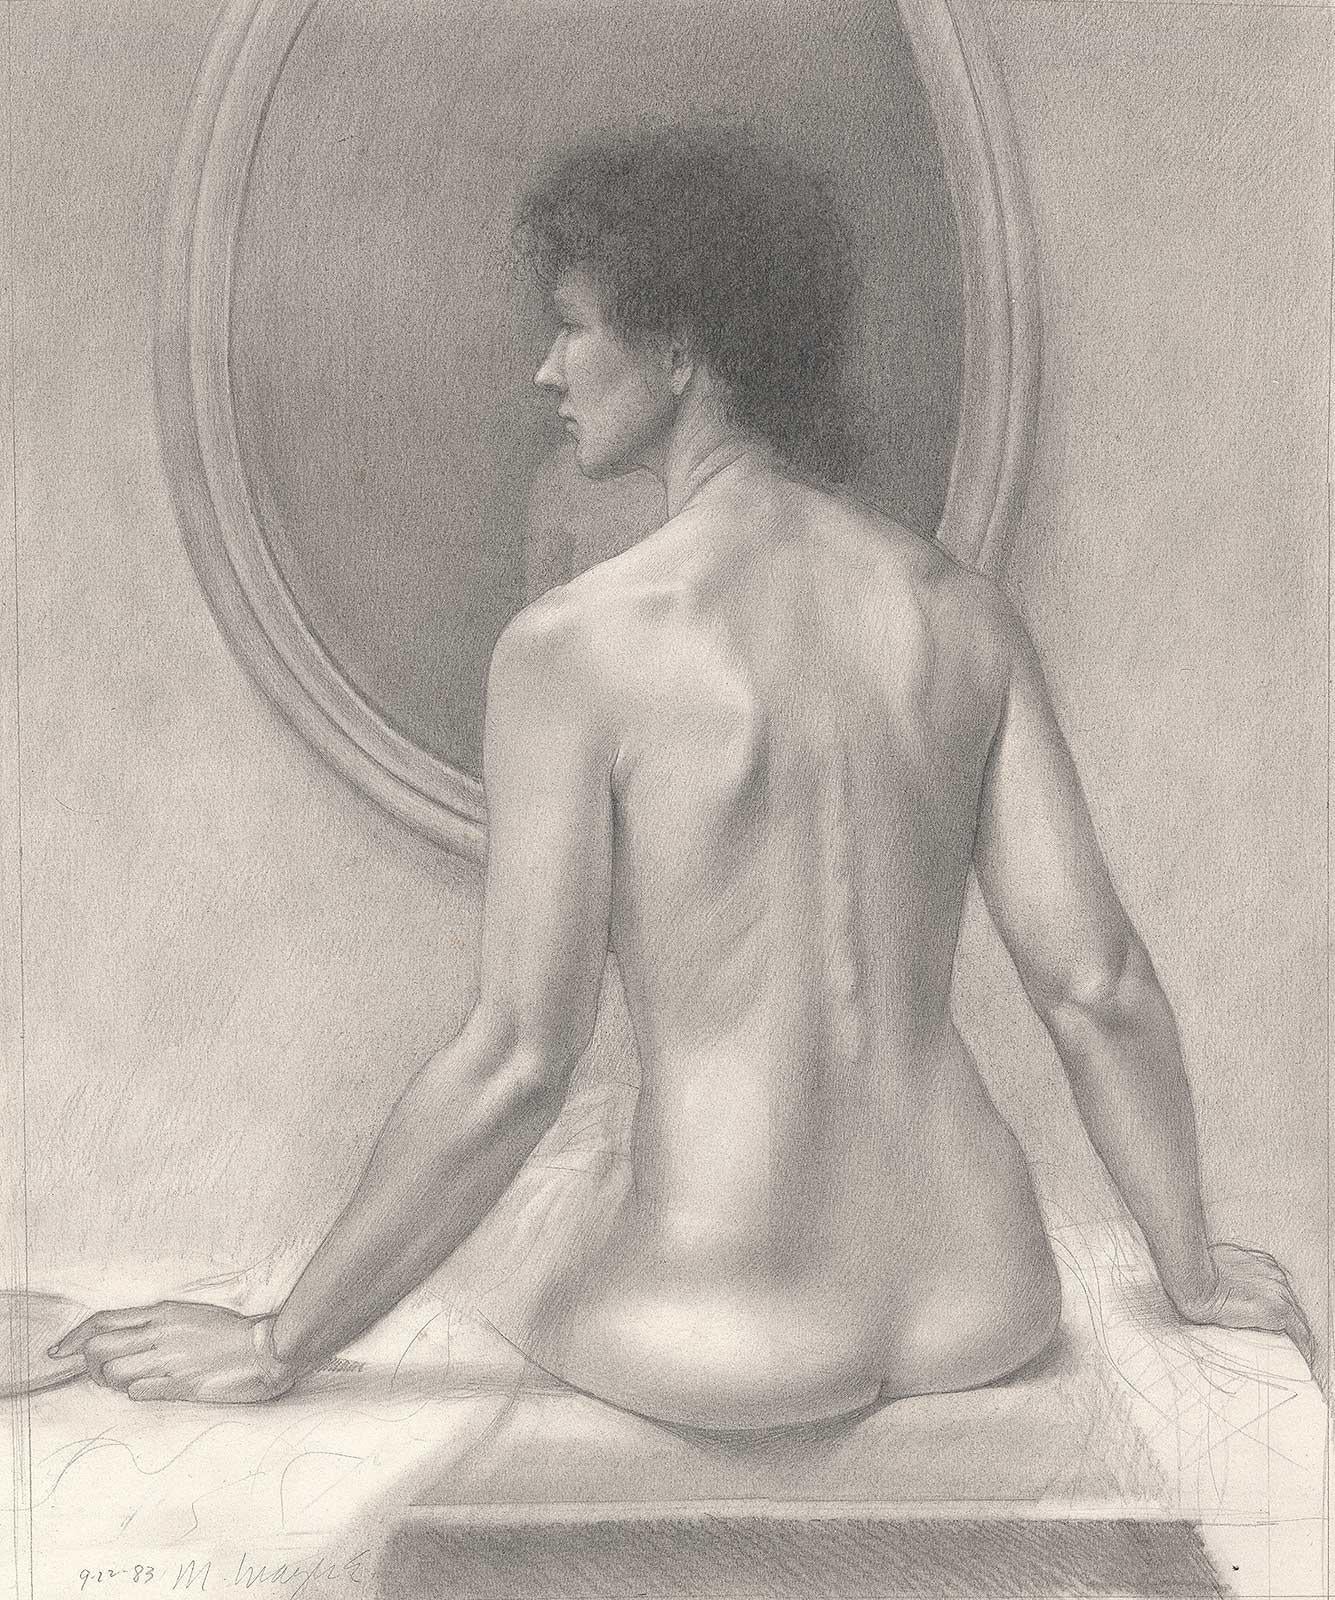 Woman With Mirror (Nude woman looks to the left as she sits in front of mirror) - Art by Martha Erlebacher